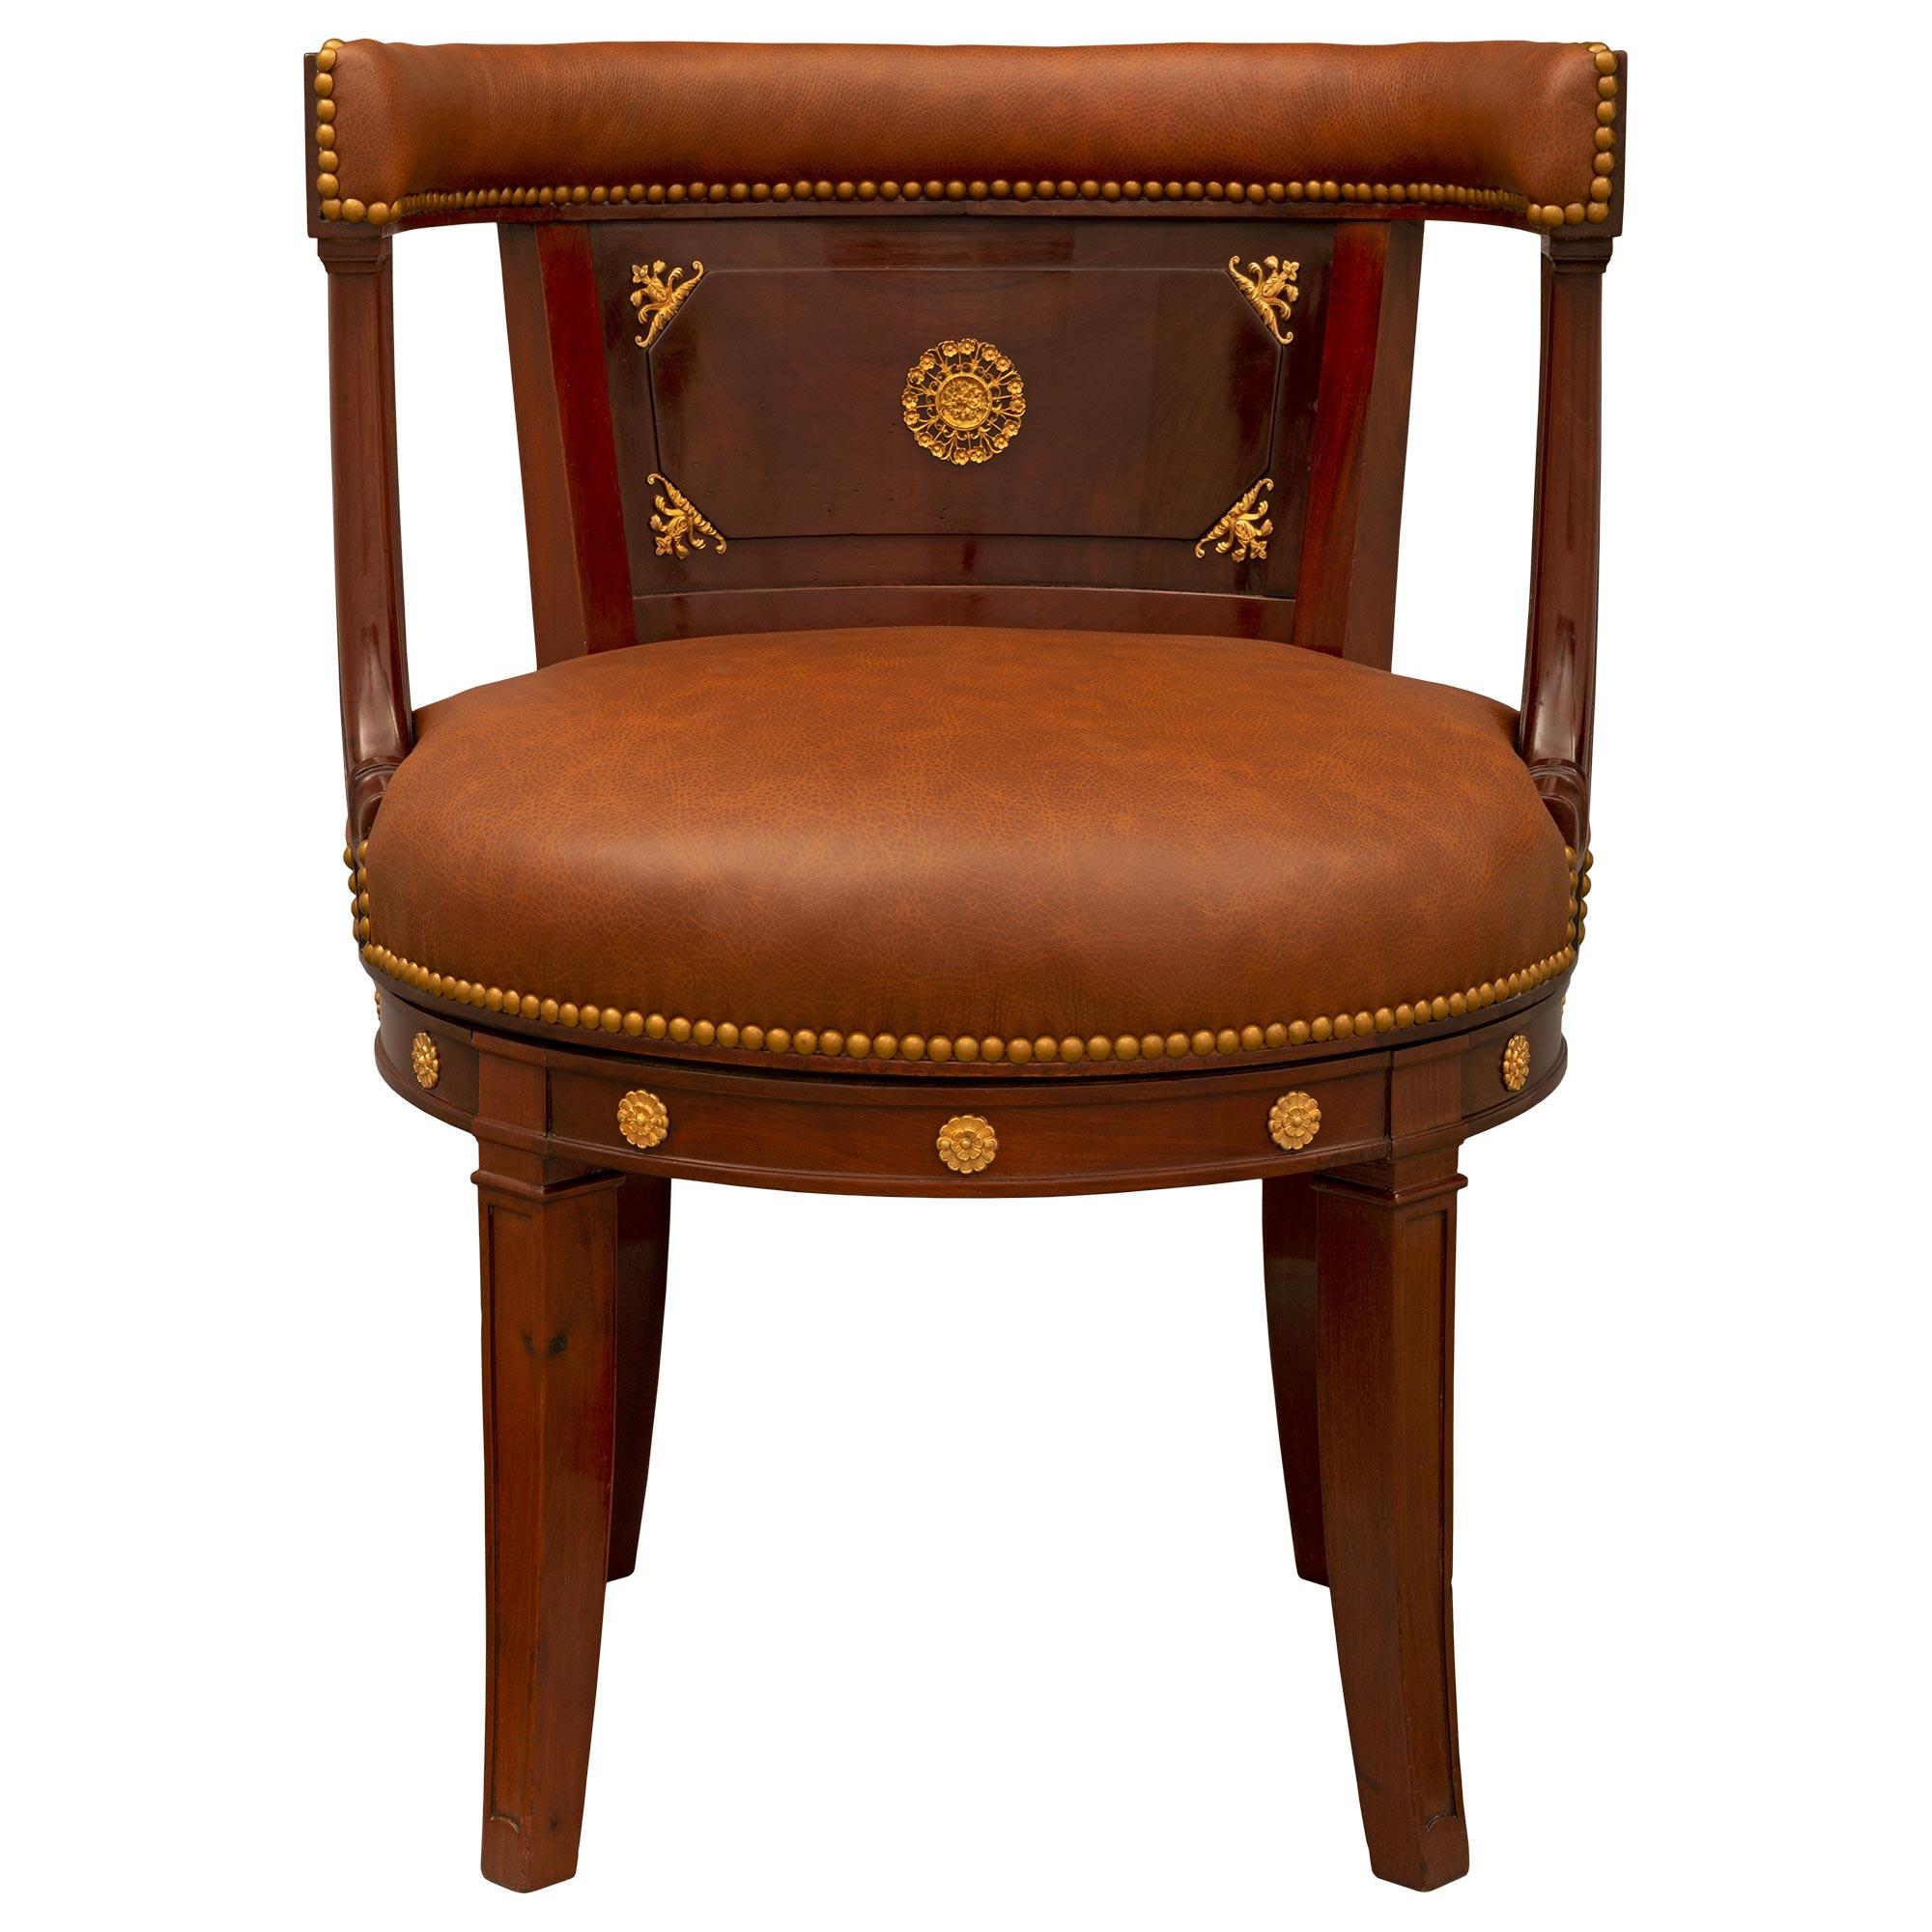 An impressive and unique French 19th century Empire St. Mahogany and Ormolu desk armchair. The armchair is raised by handsome lightly curved square legs with finely carved recessed designs and beautiful finely detailed Ormolu rosettes extending